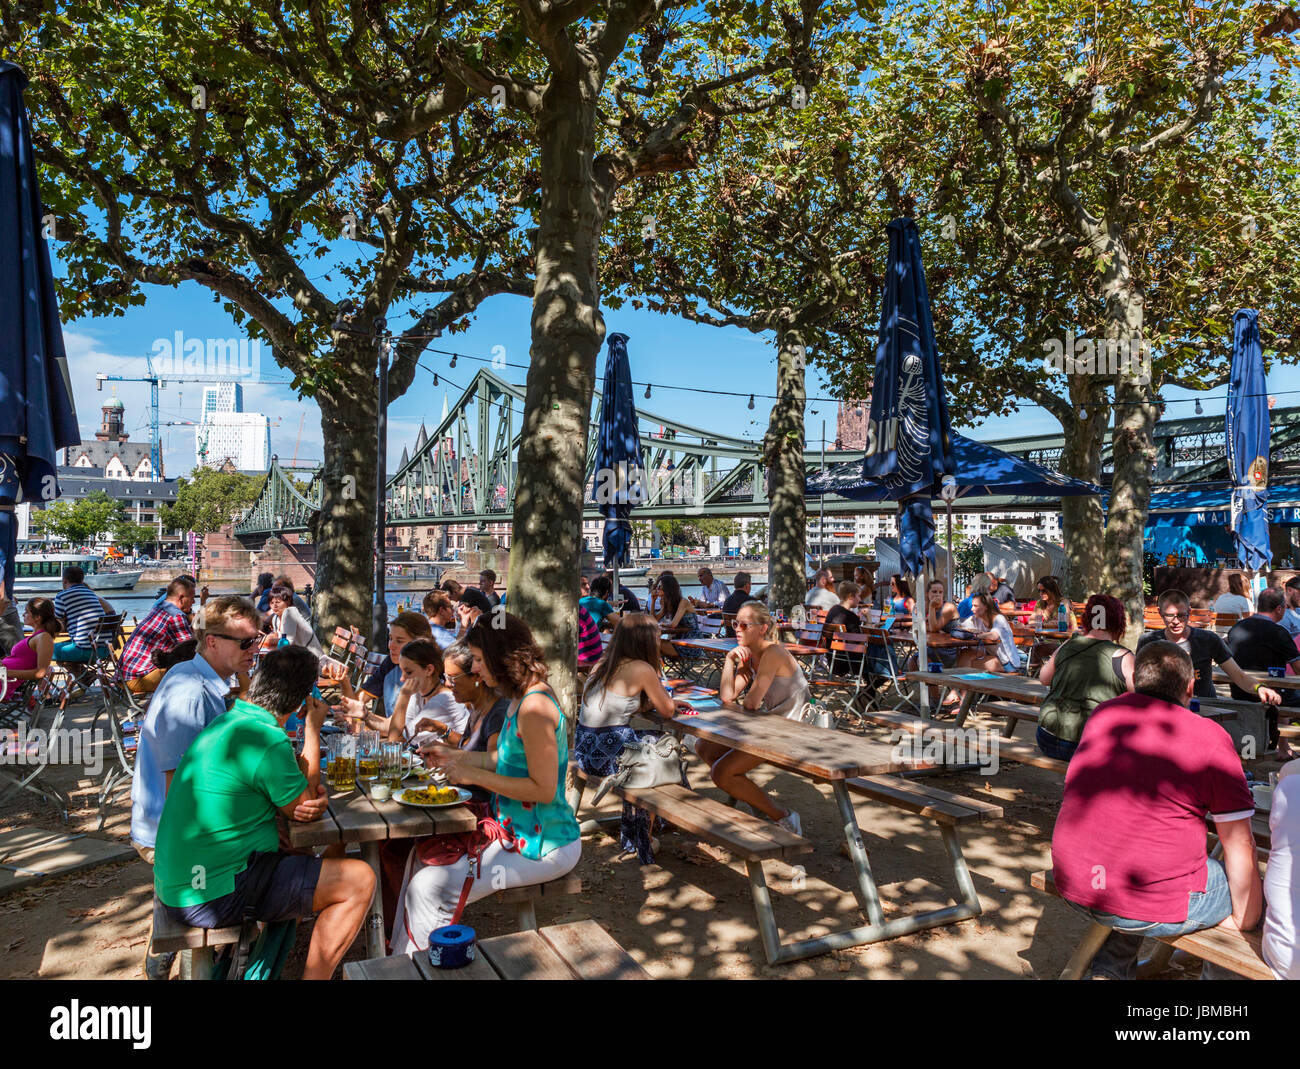 Cafe by the banks of the River Main near the Eiserner Steg, Frankfurt, Germany Stock Photo